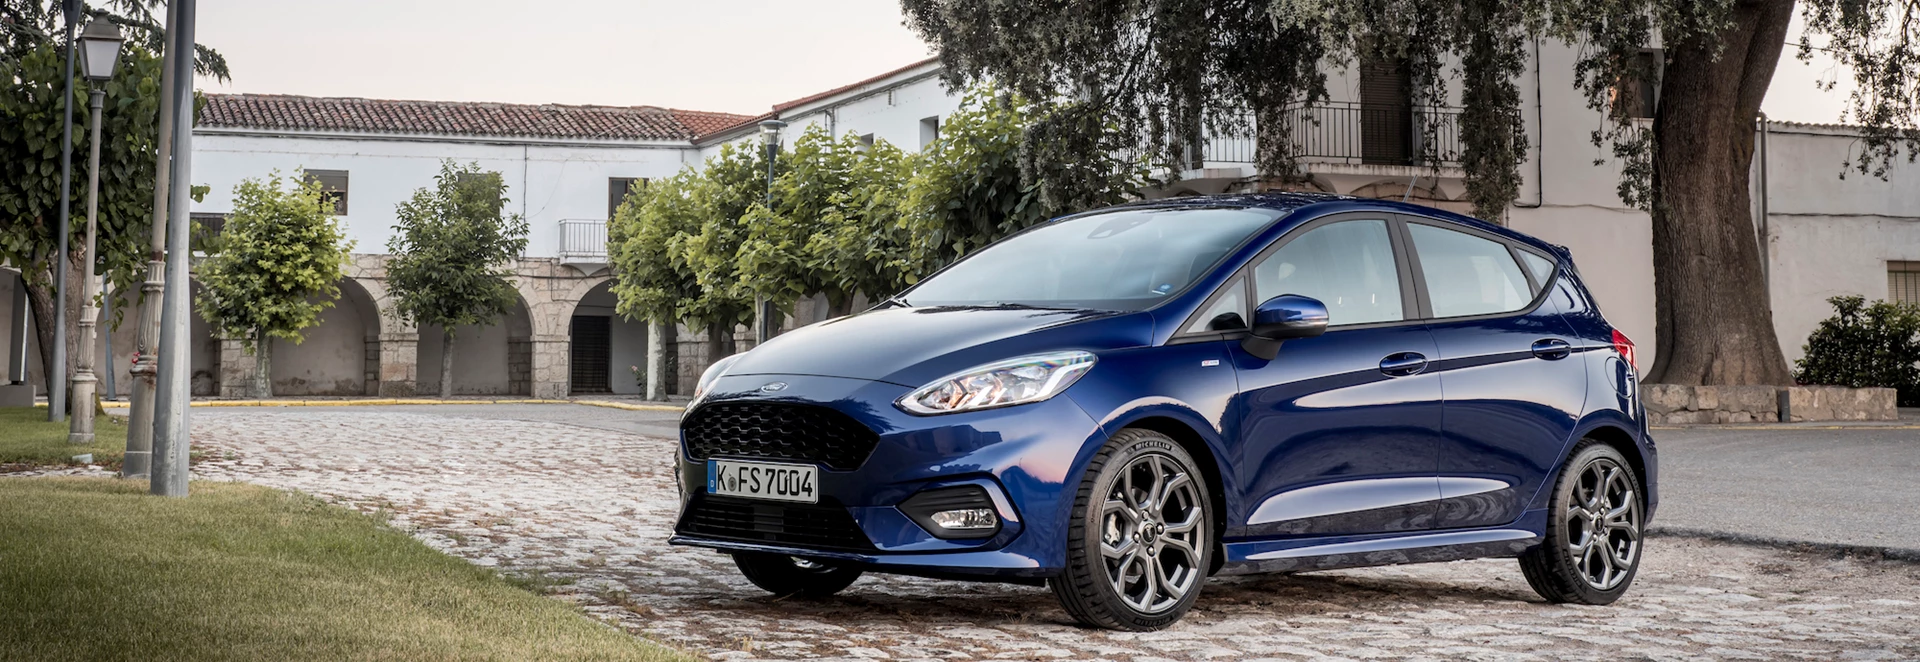 2017 Ford Fiesta ST-Line X hatchback review